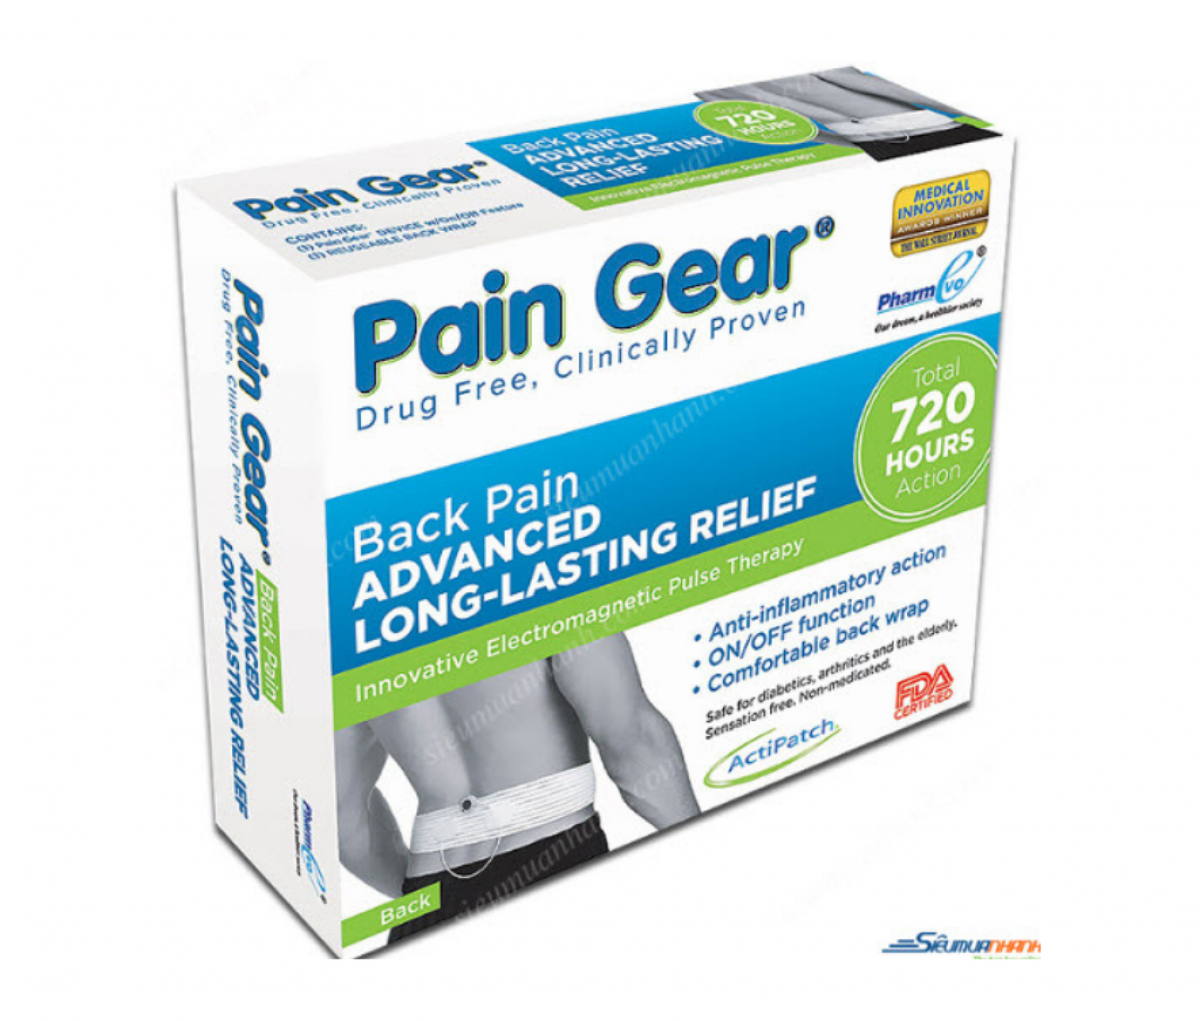 Pain Gear Back Pain Relief